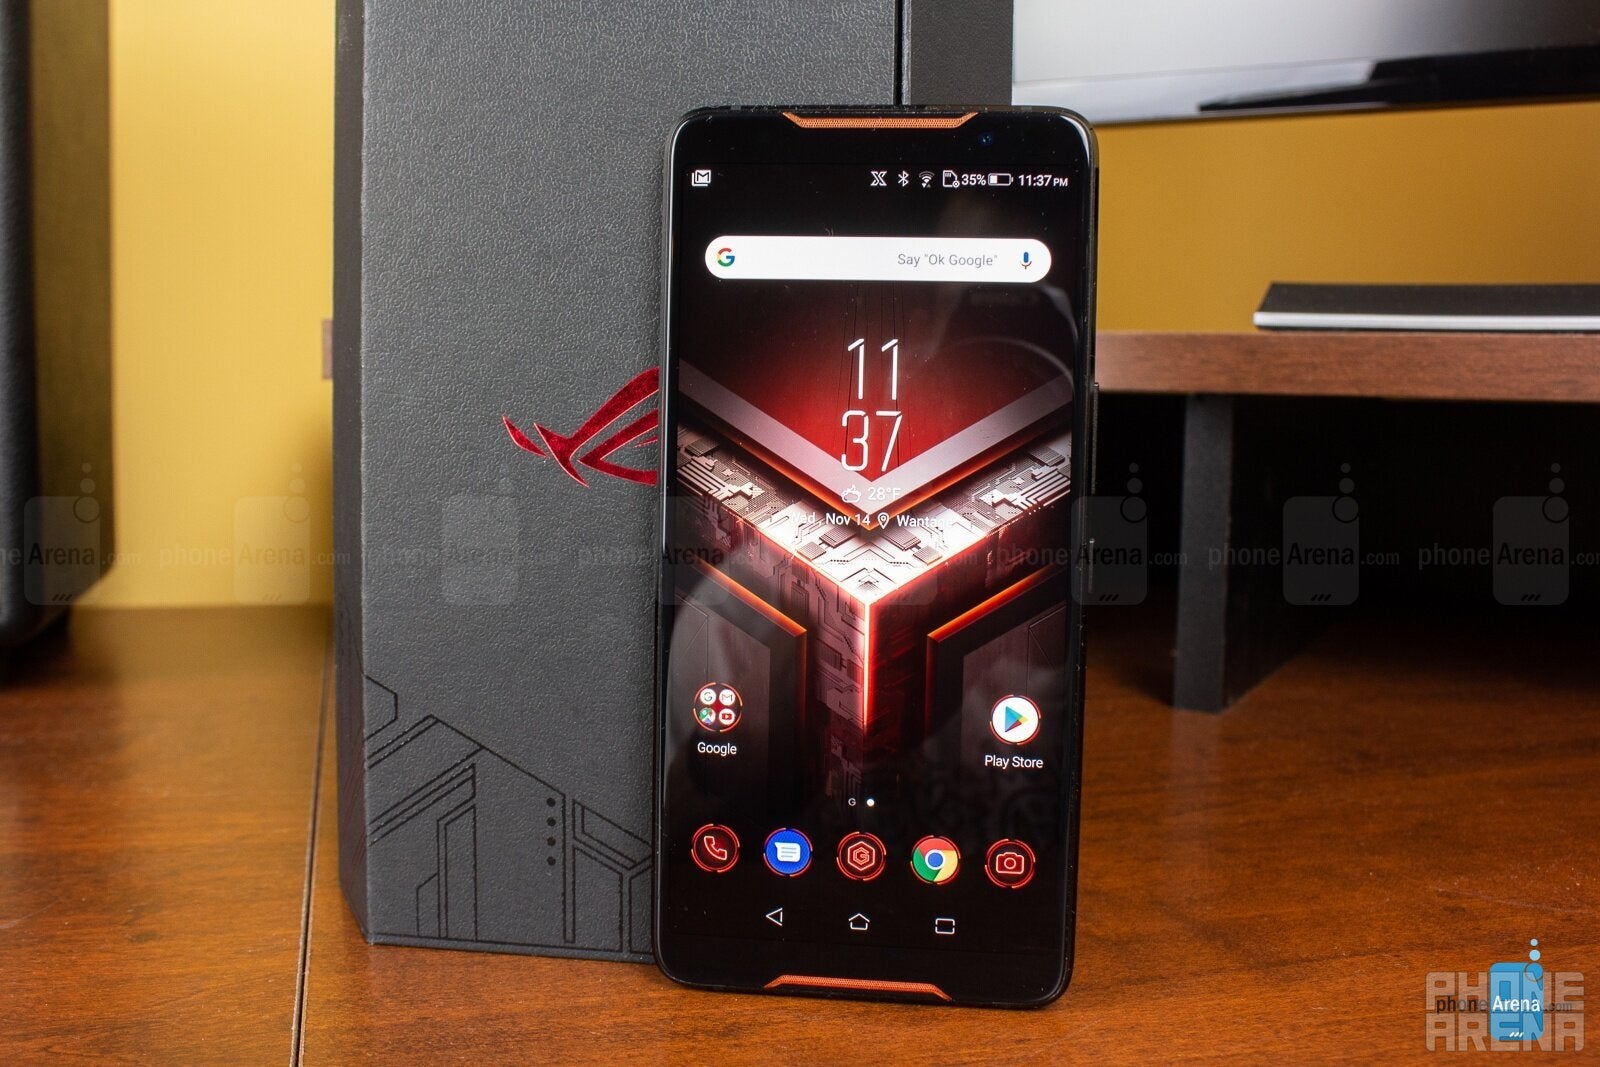 The ROG Phone is certainly not your ordinary bezel-fighting flagship - Asus is low-key becoming a force to be reckoned with